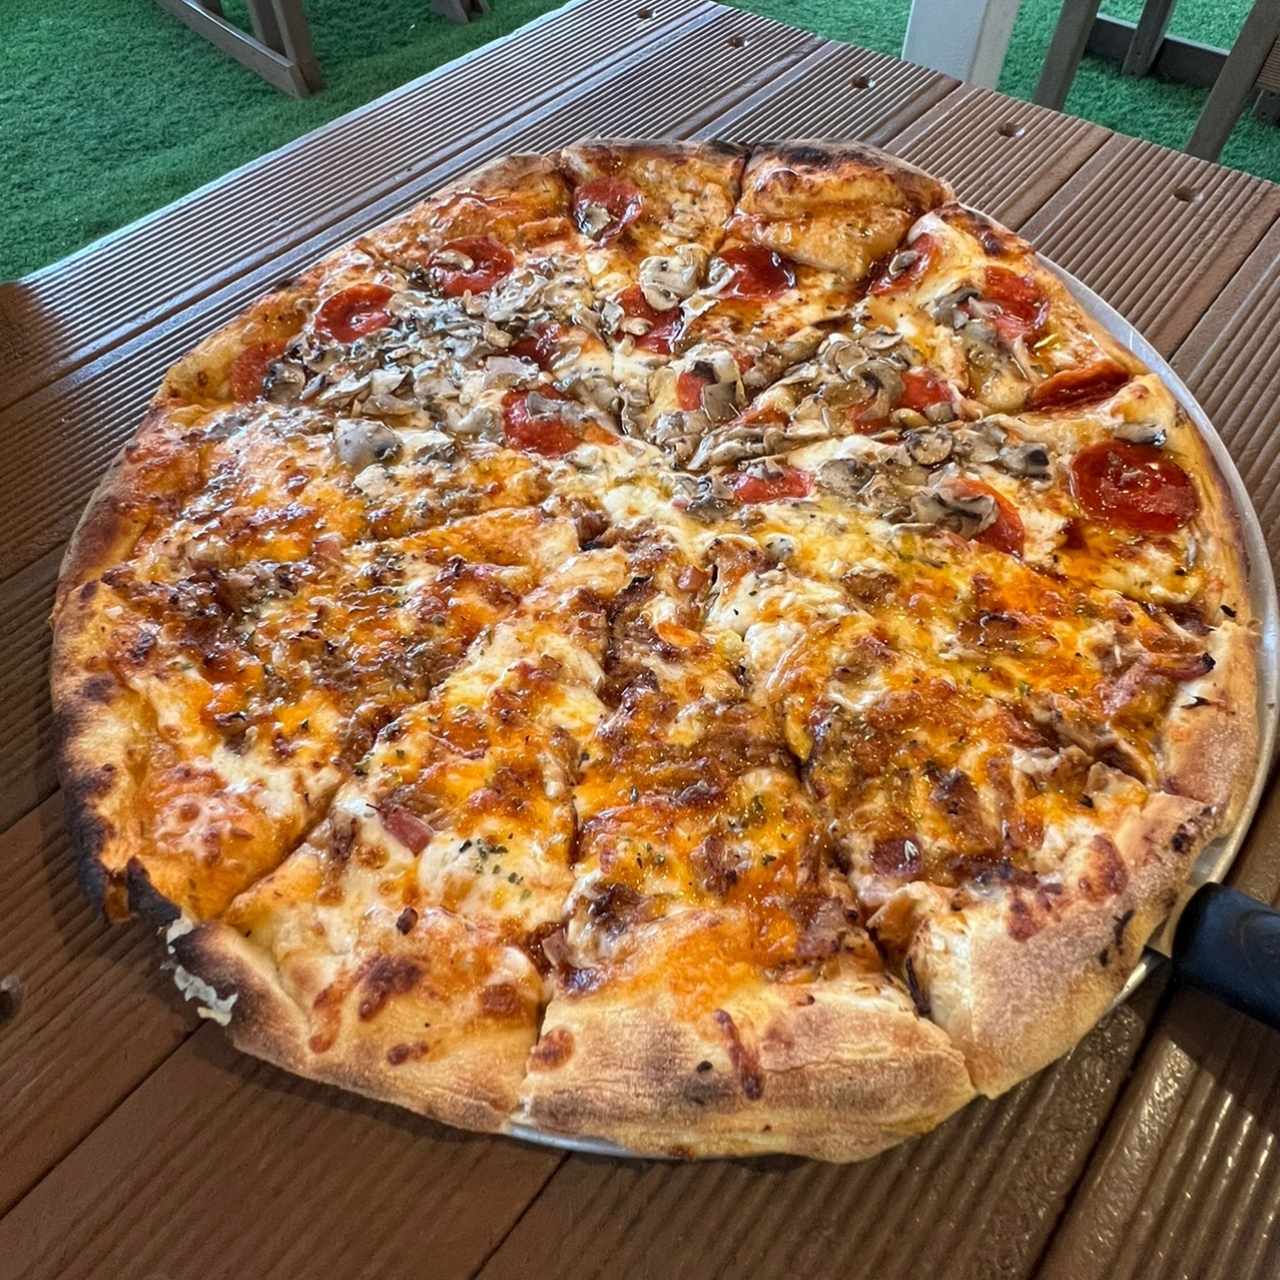 Pizzas - Pulled Pork